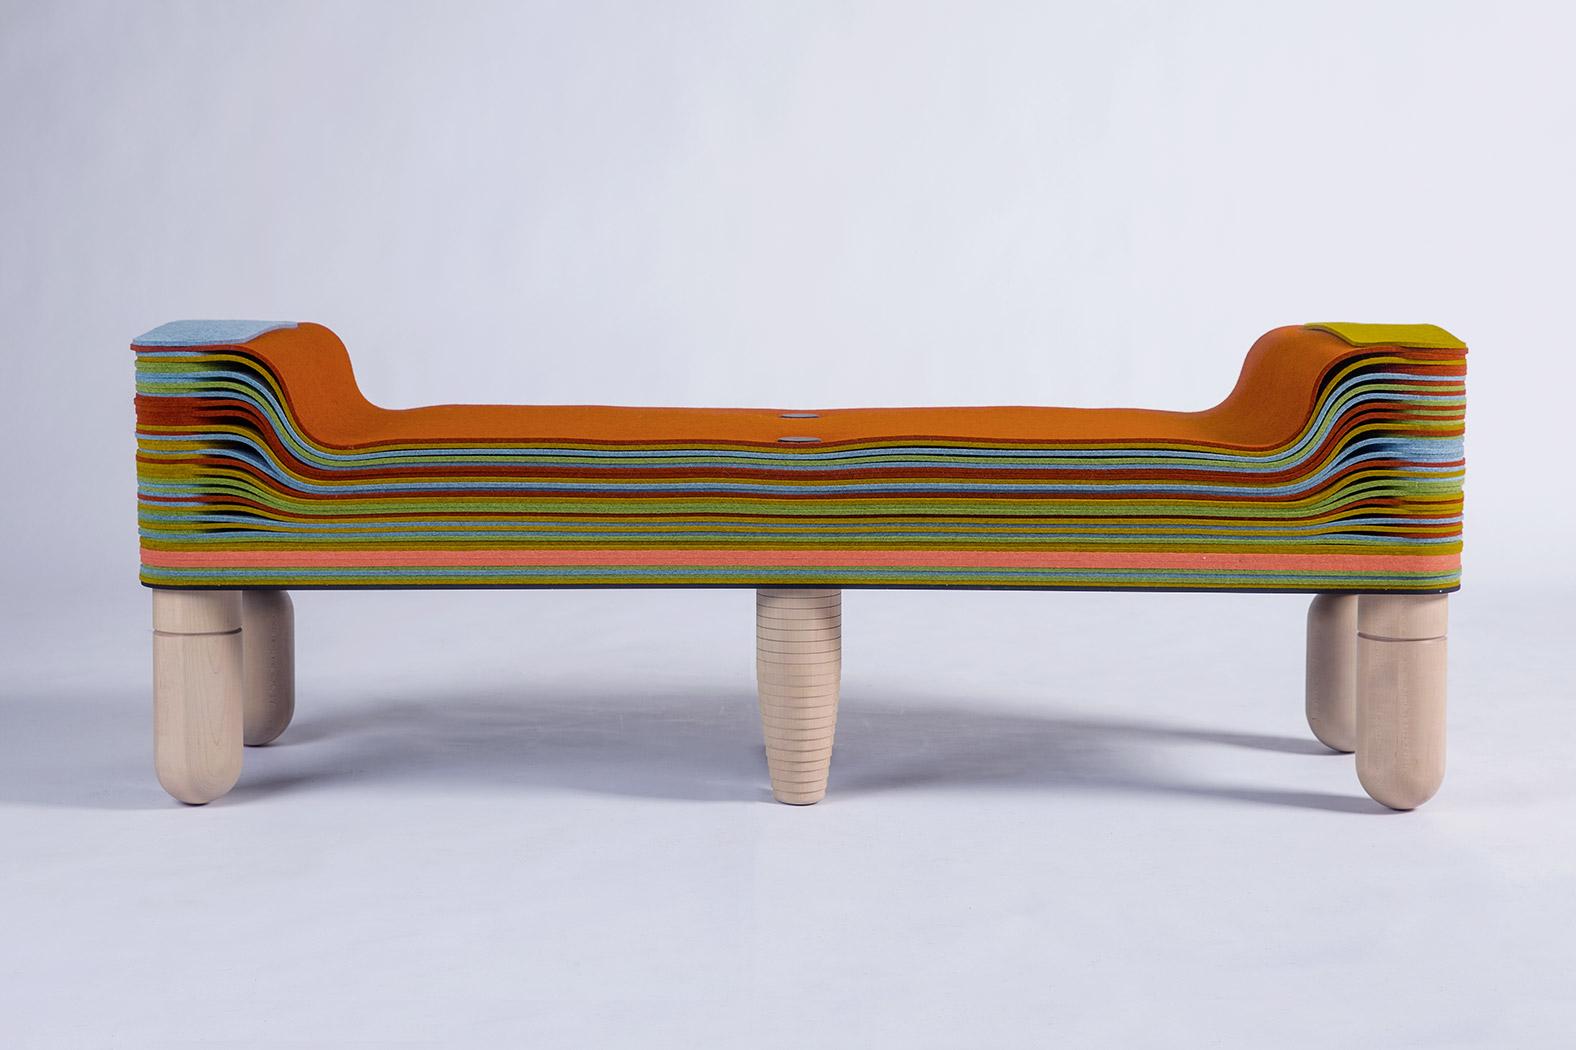 Maxine B, Felt and Wood Bench, Benoist F. Drut in STACKABL, Canada, 2021 For Sale 3